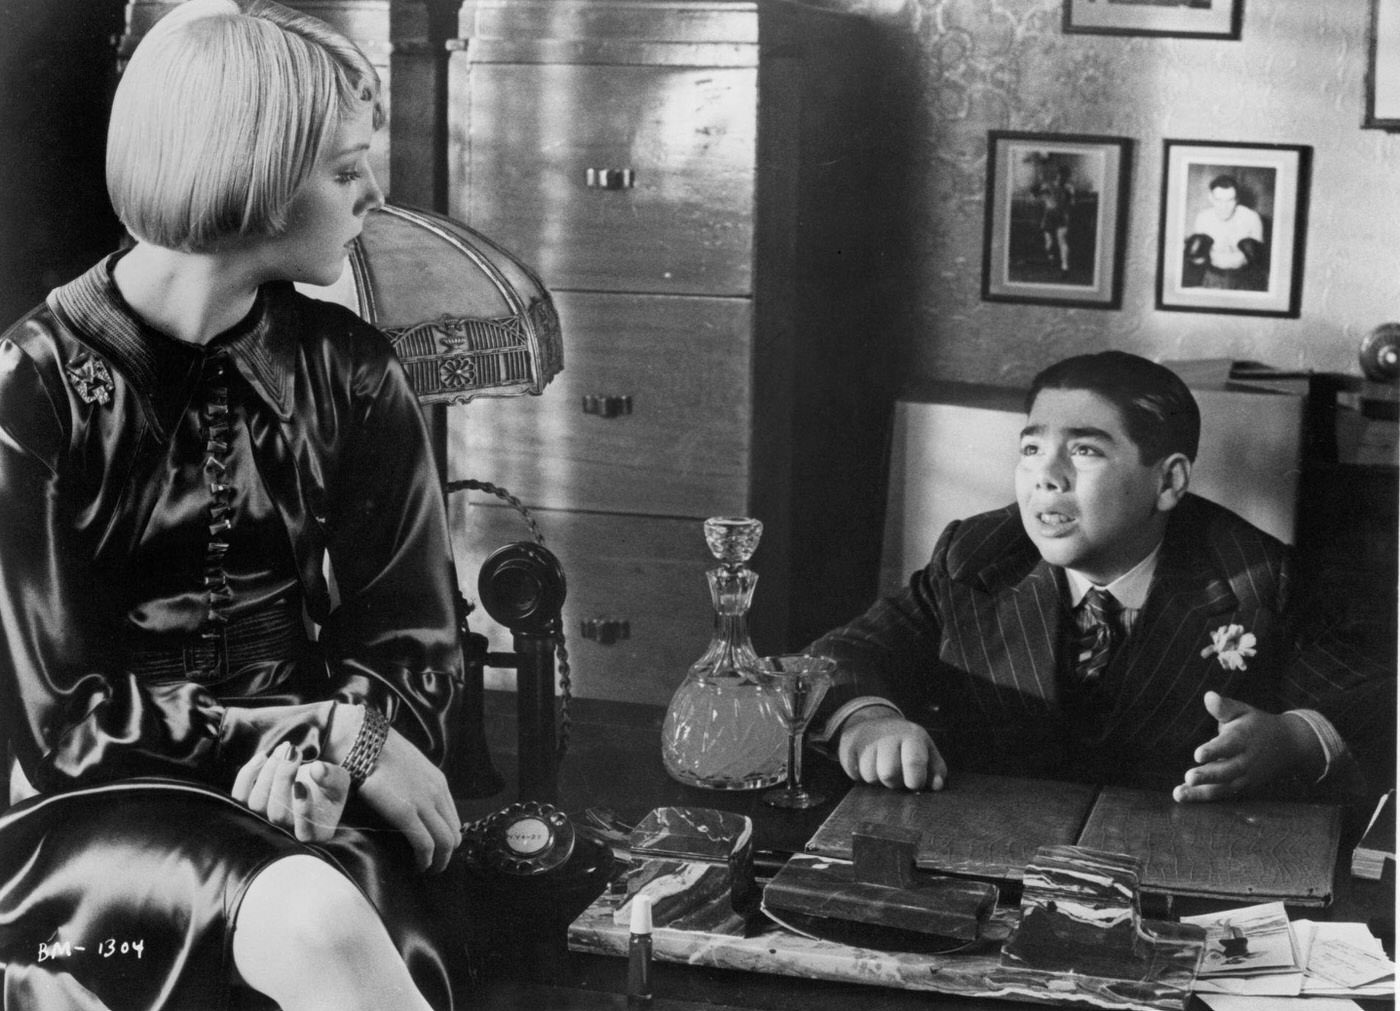 Jodie Foster and John Cassisi in 'Bugsy Malone', 1976.